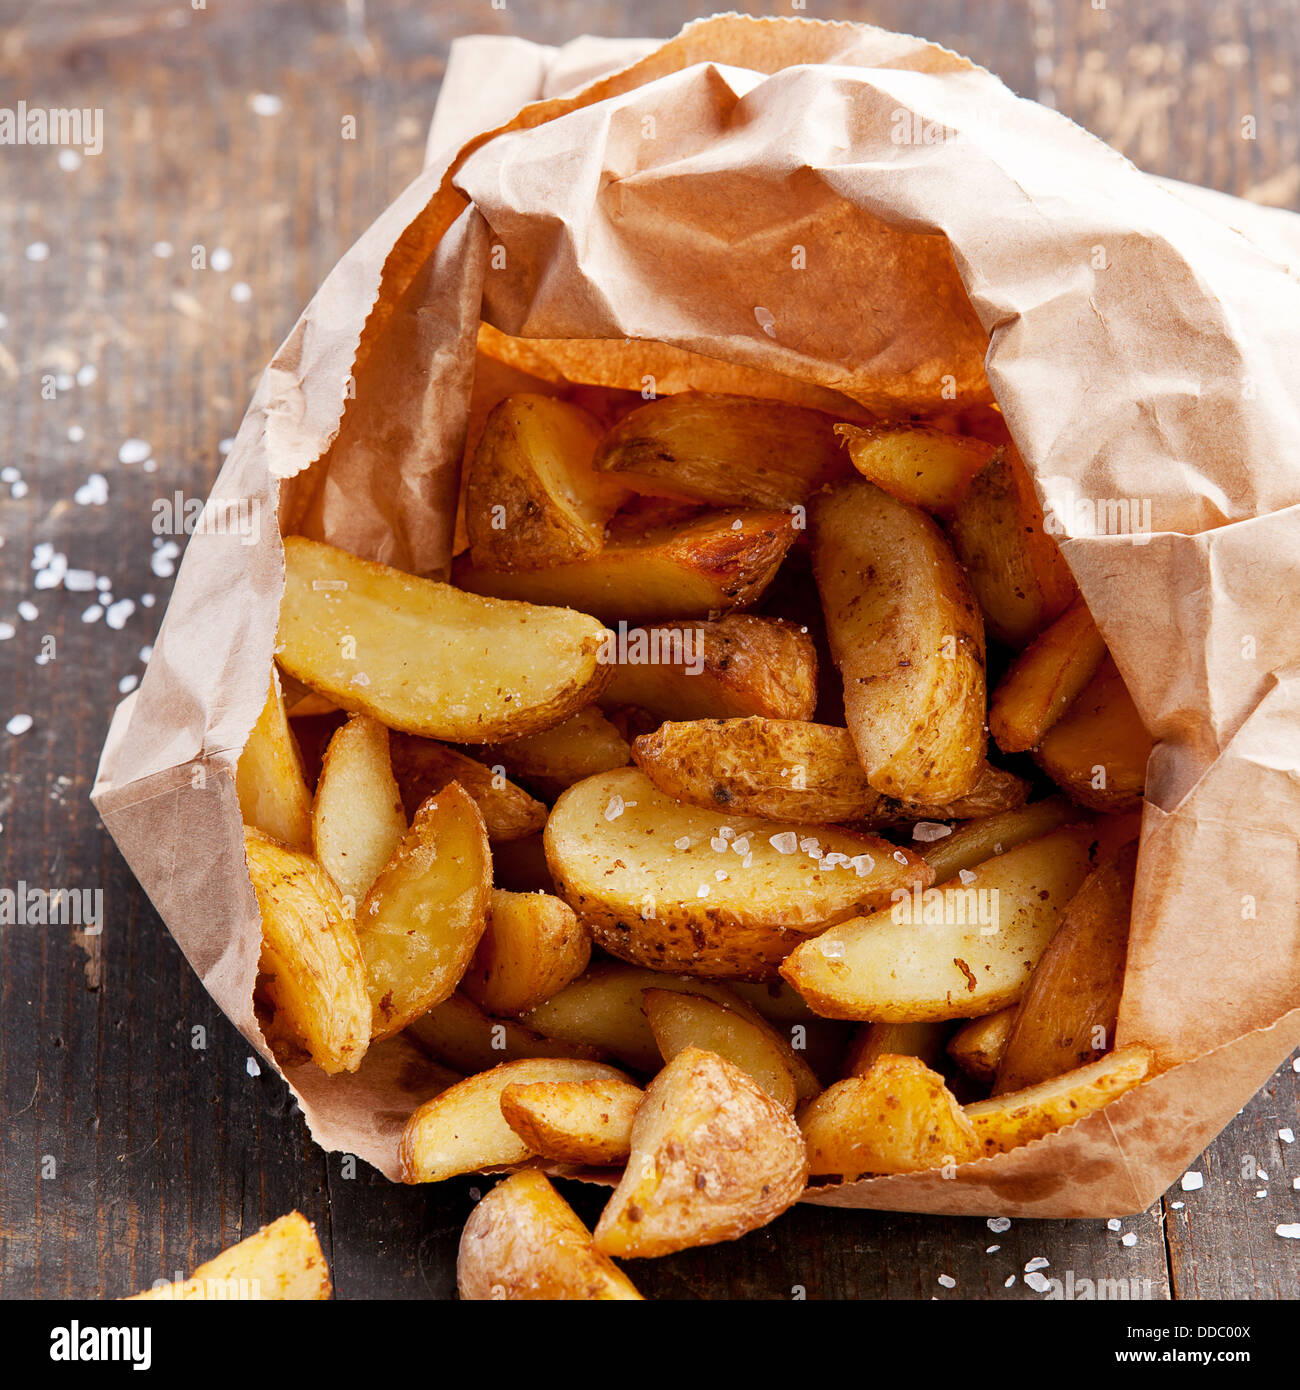 Fried potato 'country-style' in paper bag Stock Photo